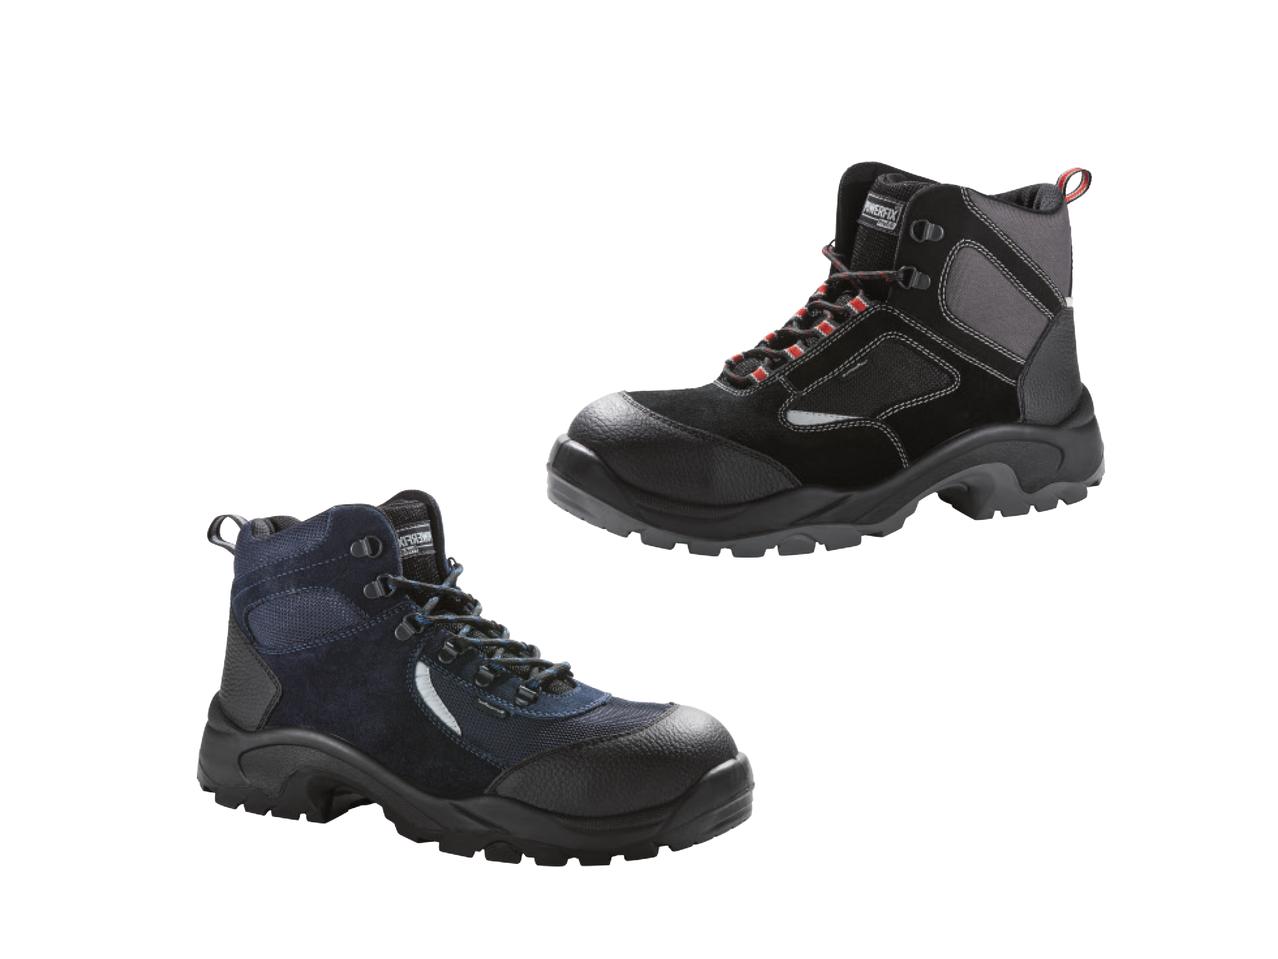 POWERFIX(R) Men's Professional Leather Safety Boots